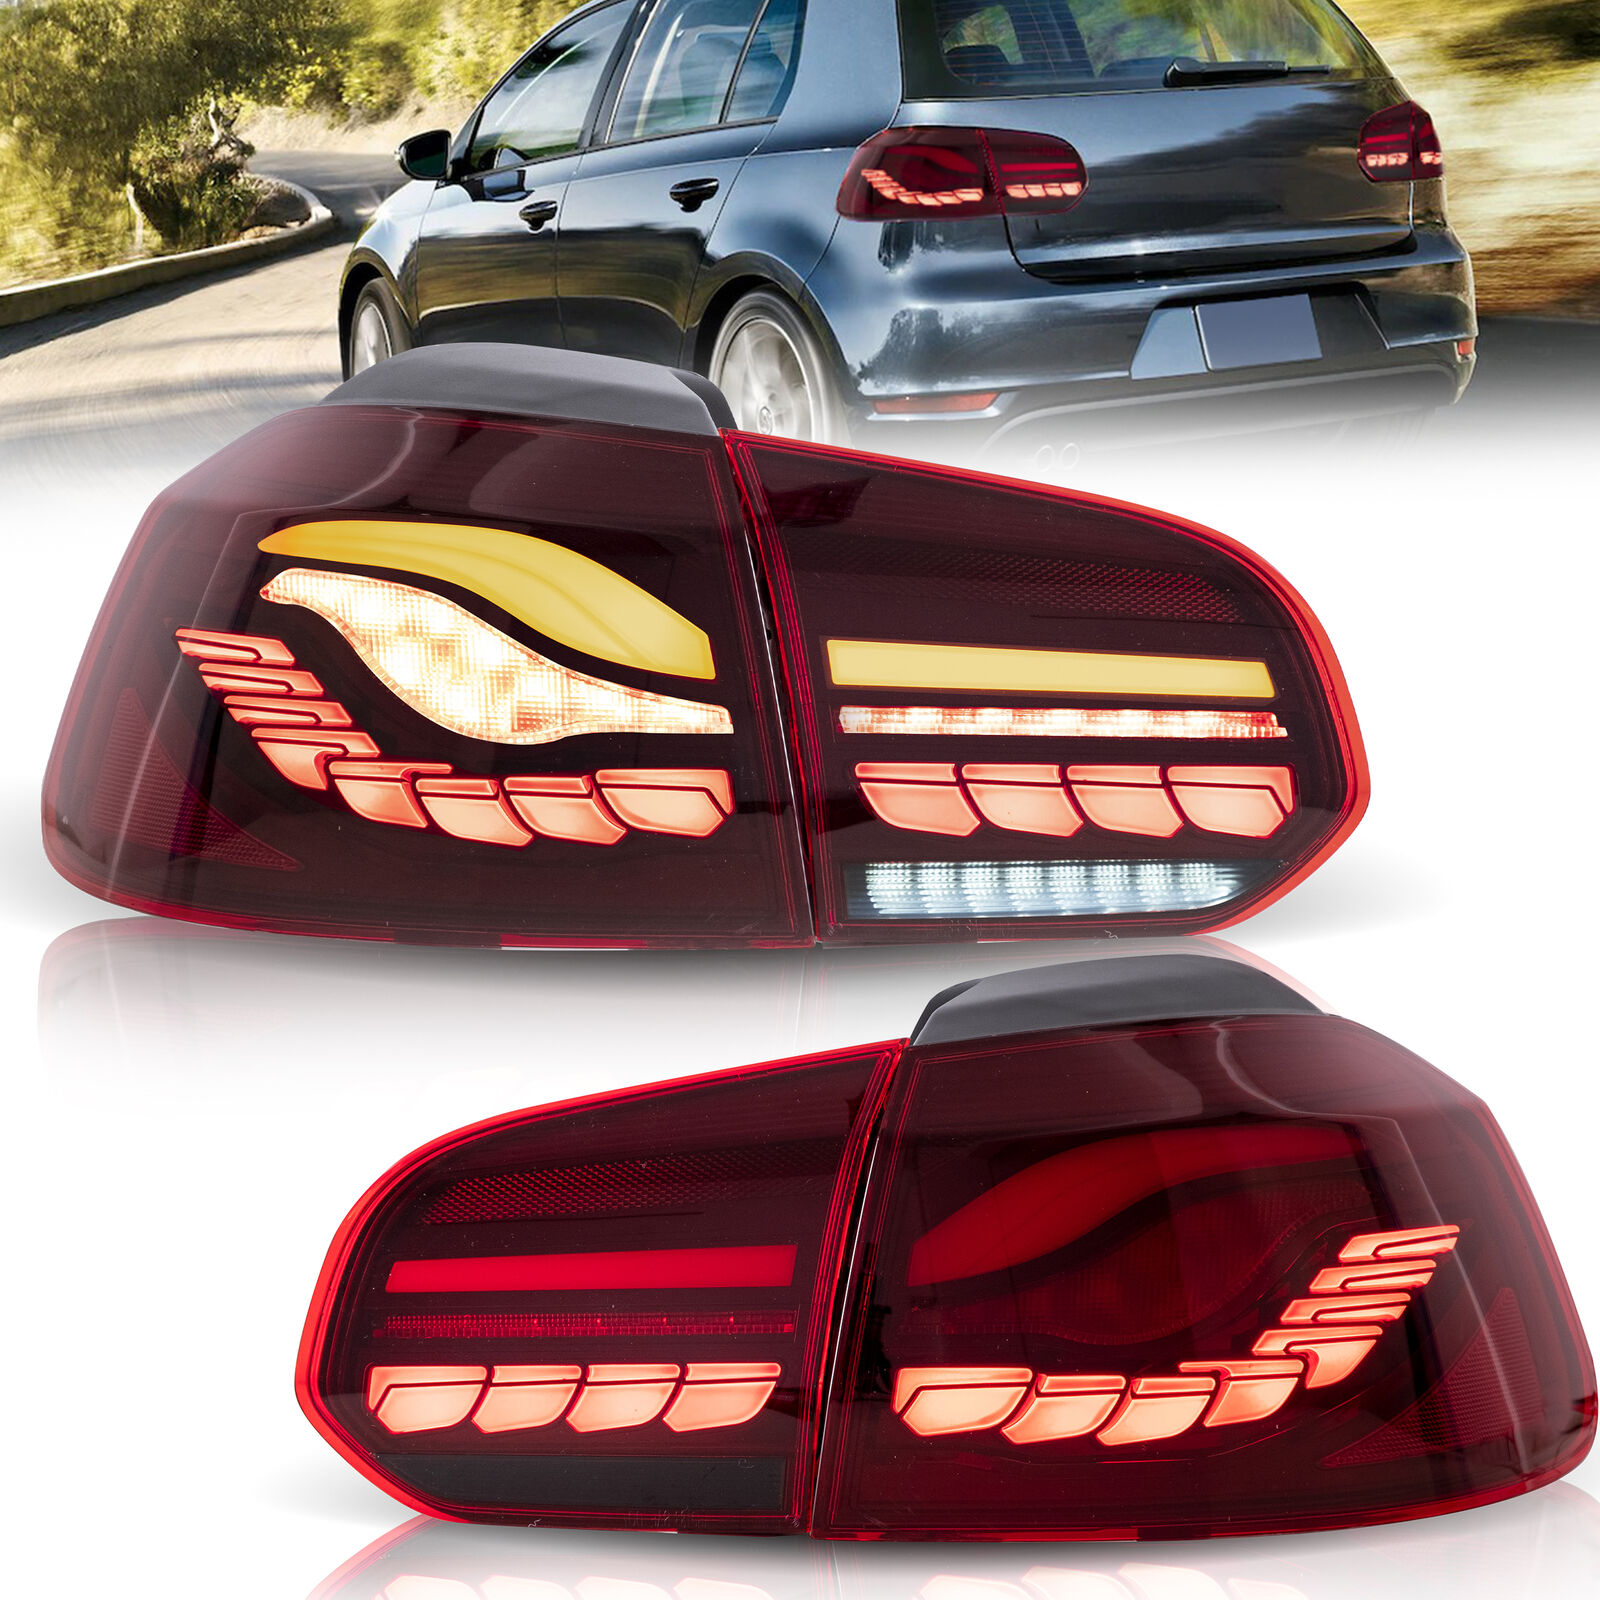 VLAND LED Red Rear Lamps For Volkswagen Golf 6 MK 6 2010-2014 w/Dynamic Signal